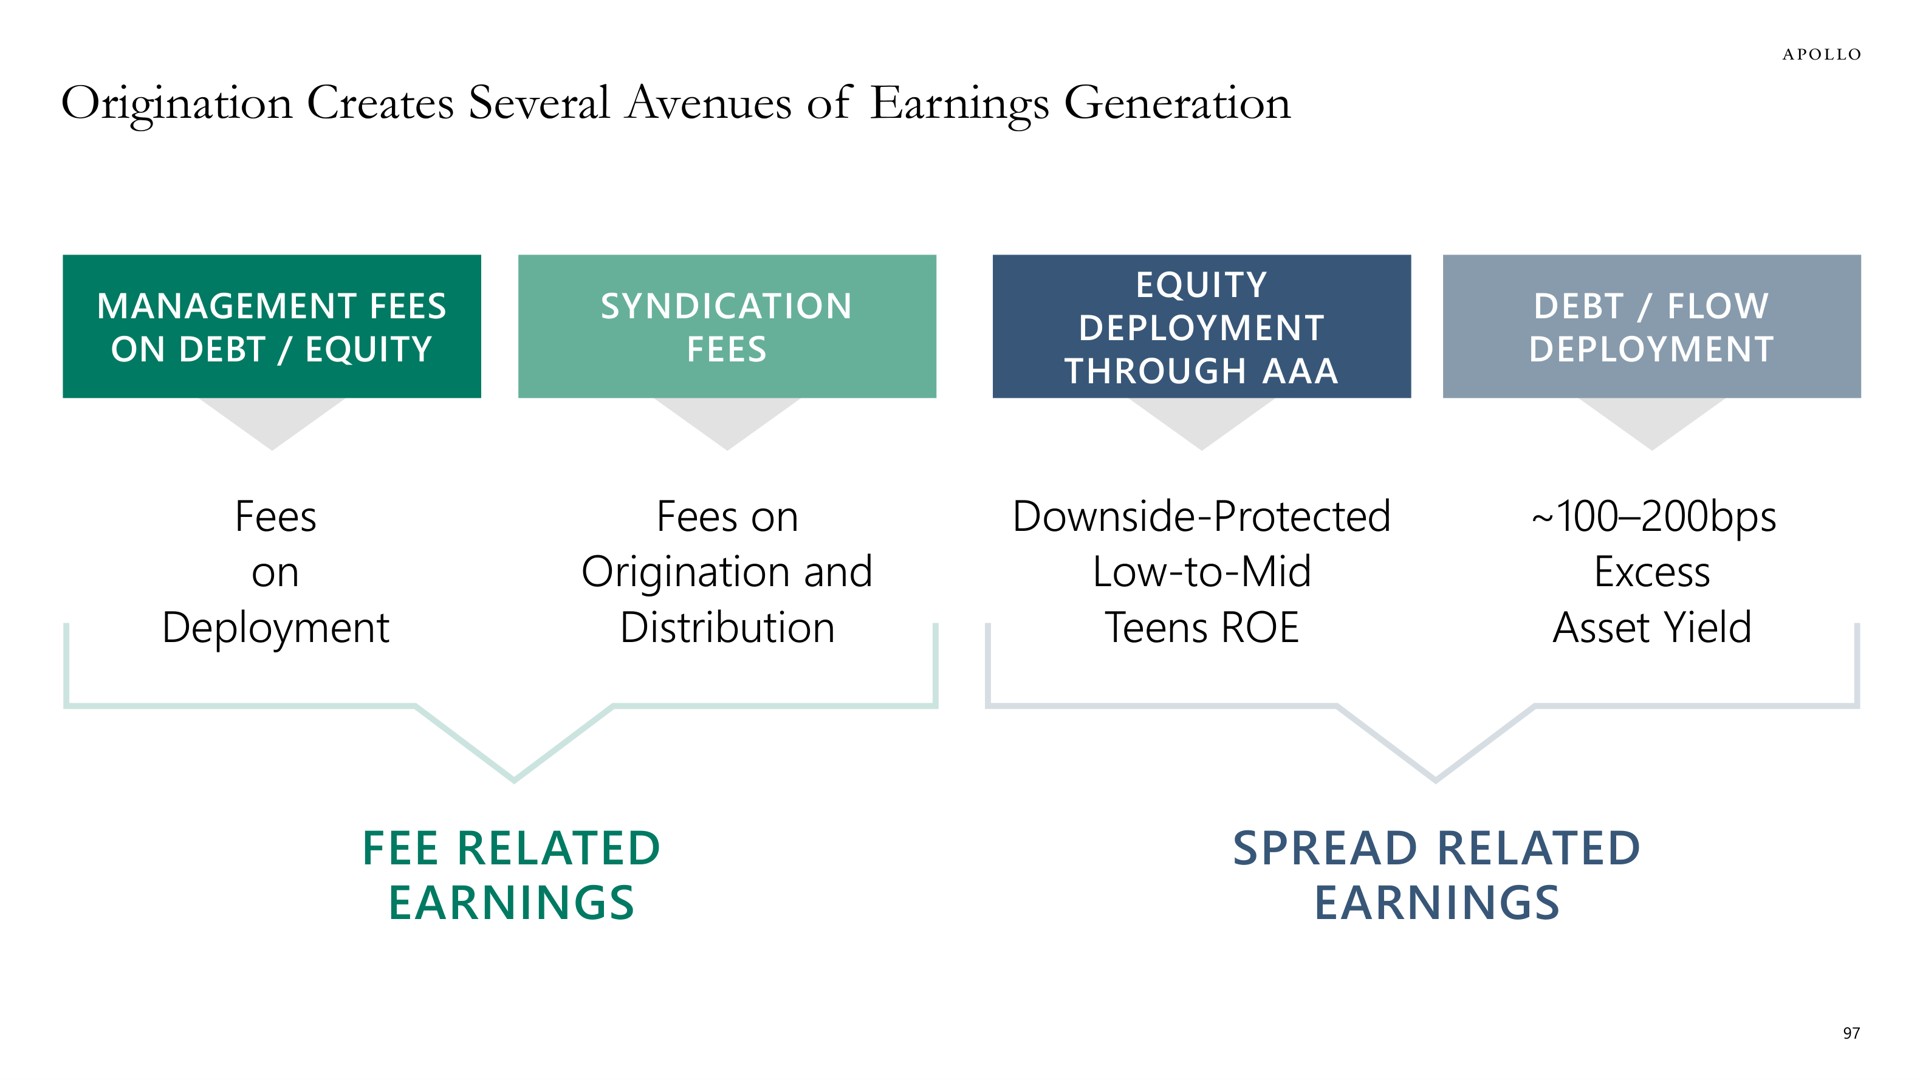 origination creates several avenues of earnings generation fee related earnings spread related earnings management fees on debt equity syndication a through a deployment distribution teens roe asset yield | Apollo Global Management